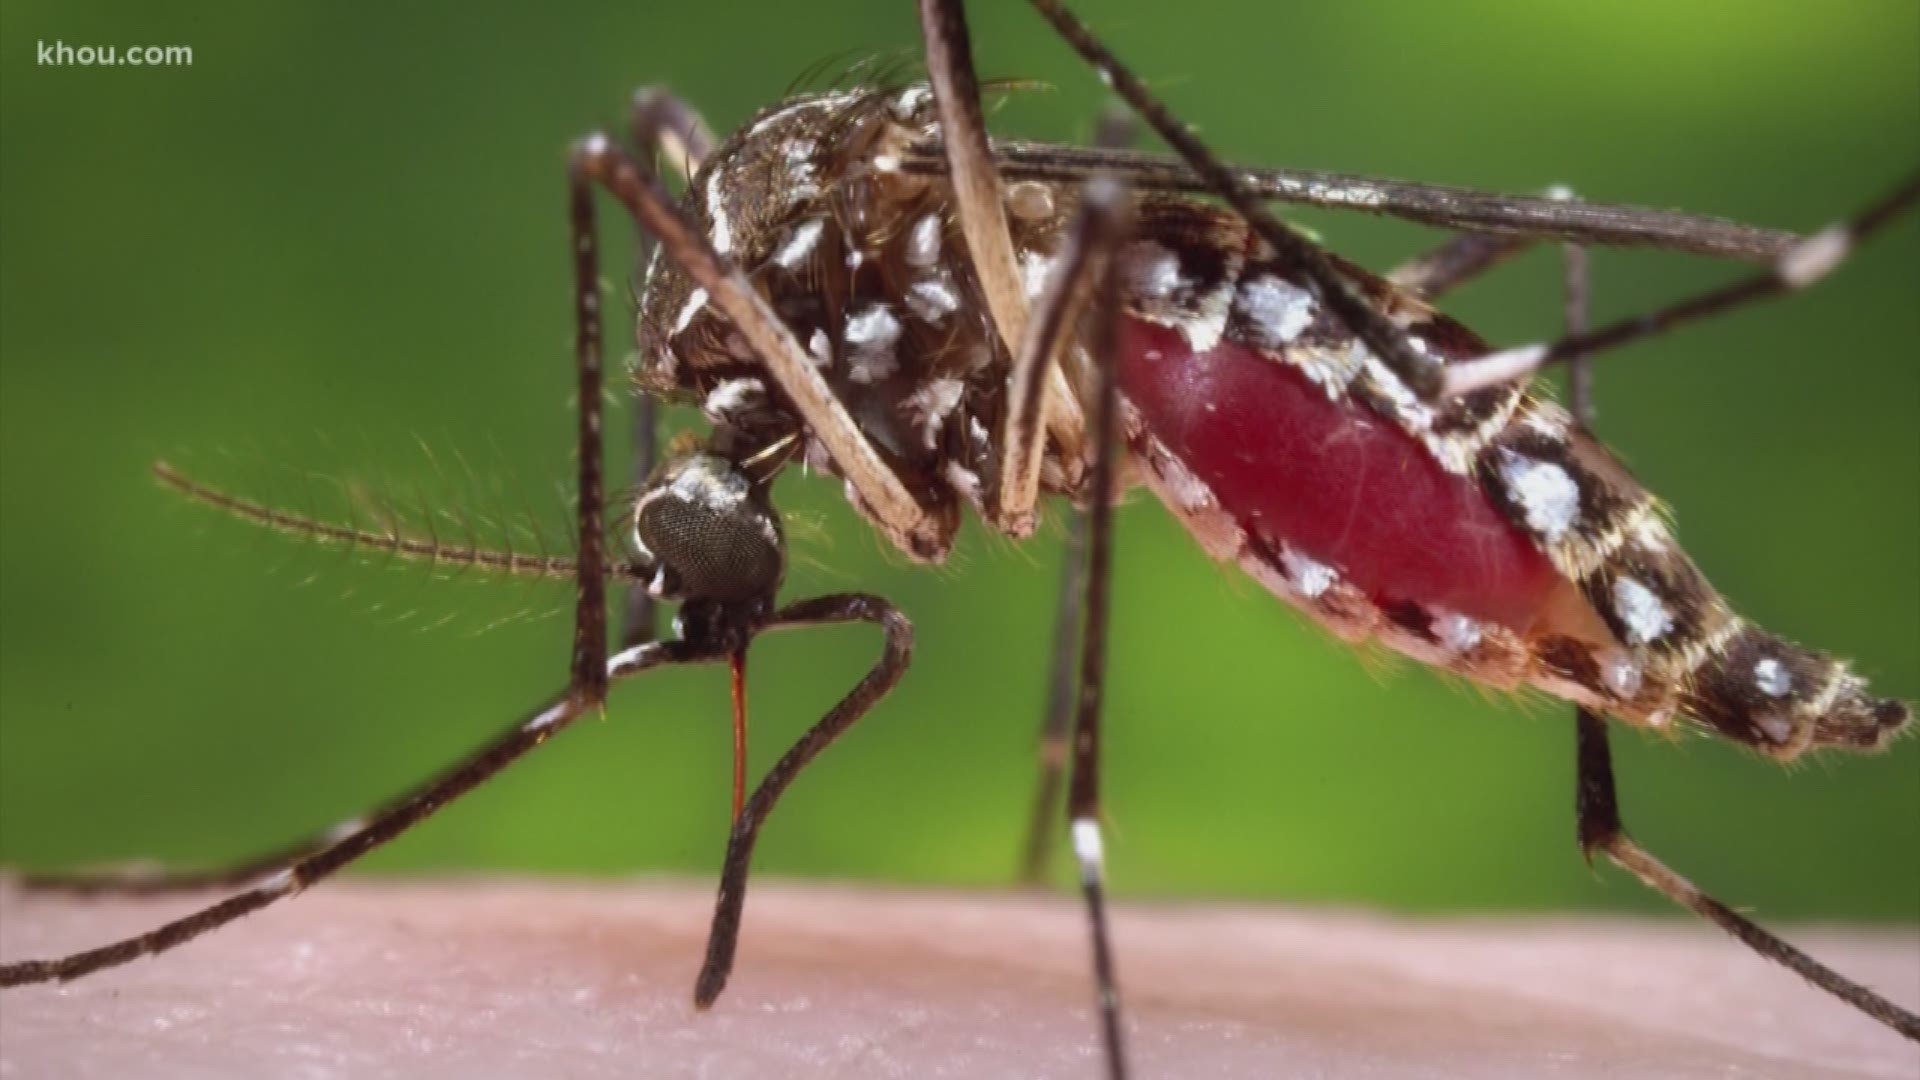 As the weather heats up, the VERIFY team has seen numerous questions about whether mosquitoes could transfer the coronavirus. Our experts say false.